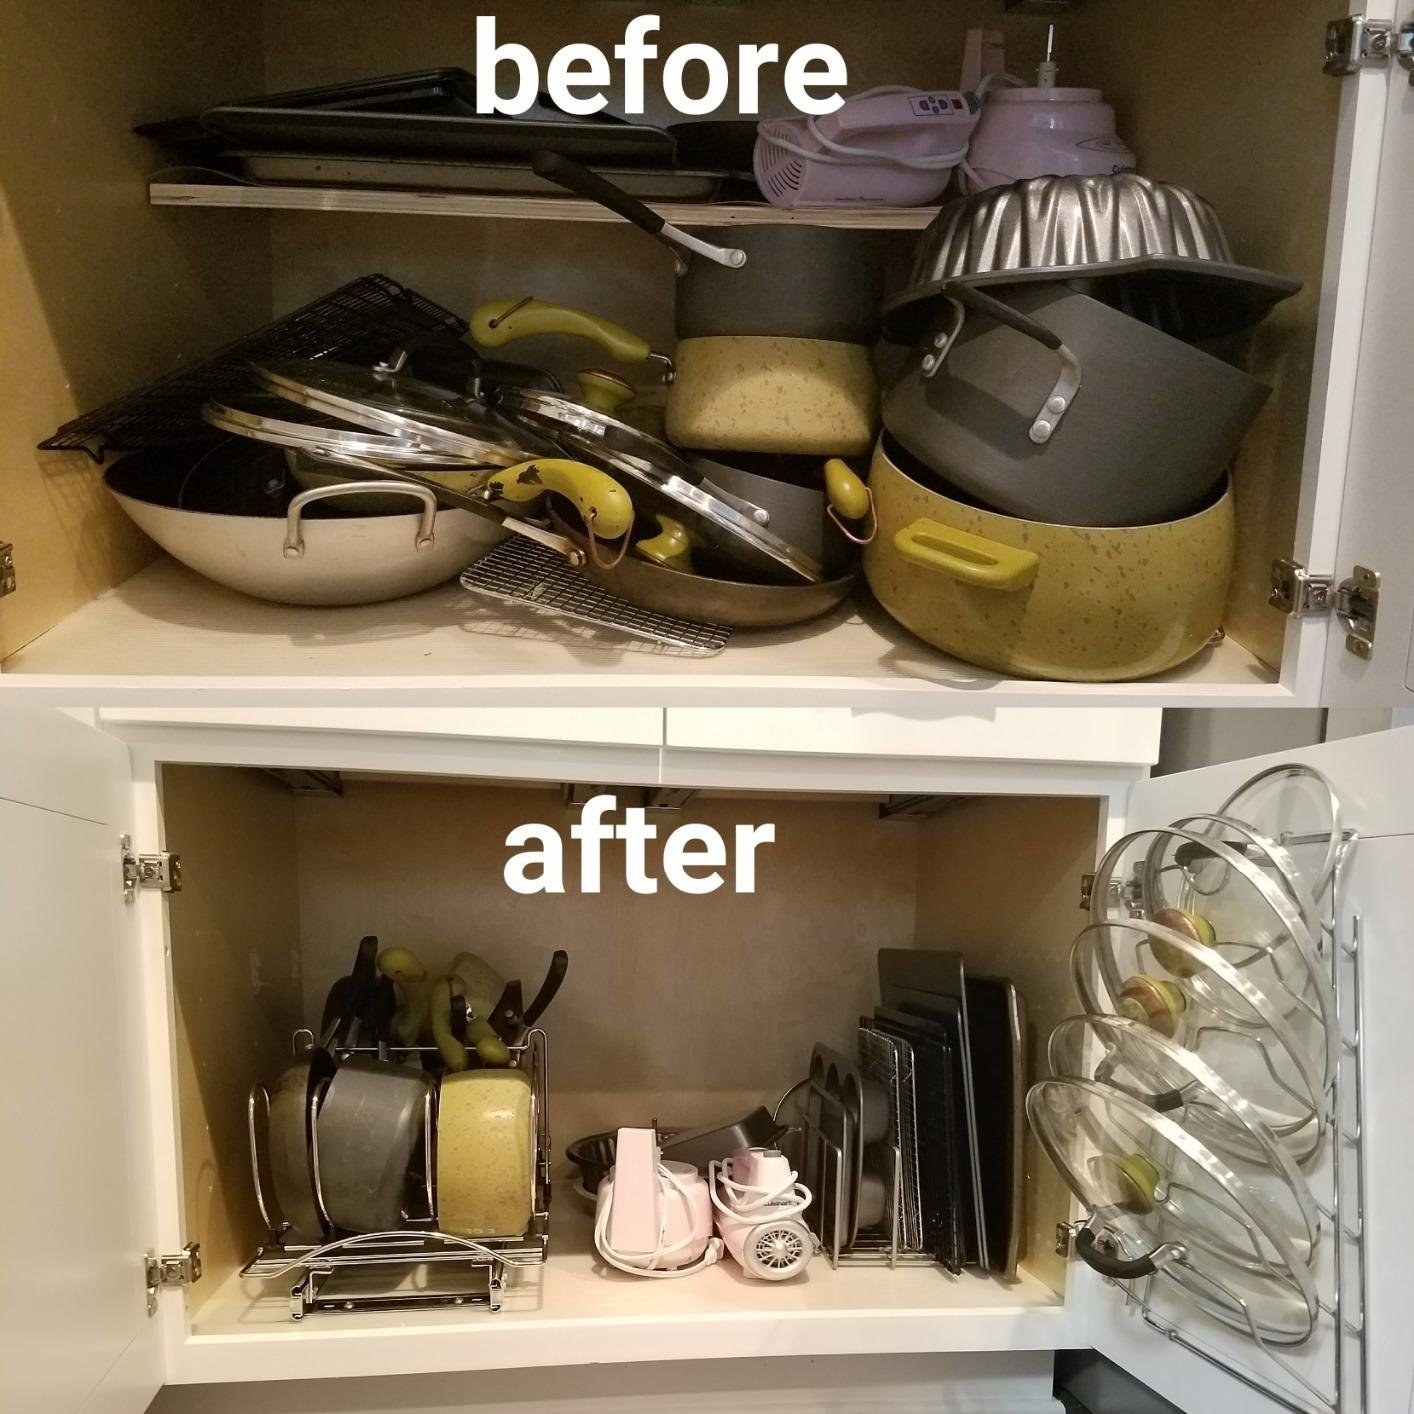 labelled &quot;before&quot;: a kitchen cabinet cluttered with pots, pans, and lids; labelled &quot;After&quot;: the same cabinet organized with lid and pan racks